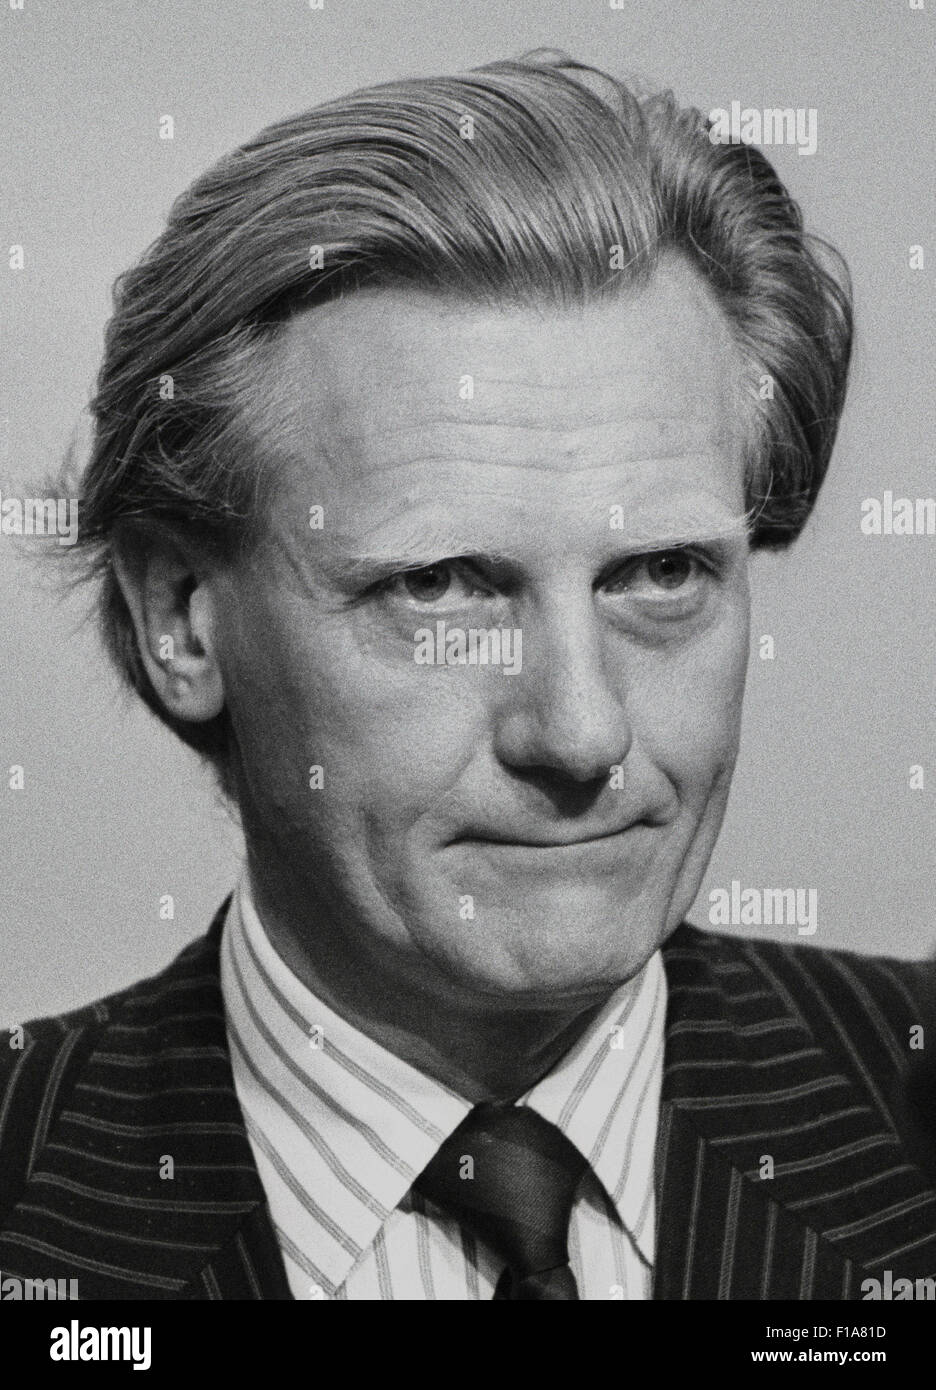 Michael Ray Dibdin Heseltine, Baron Heseltine, CH, PC (born 21 March 1933) is a British businessman, Conservative politician. Exclusive image by David Cole from the archives of Press Portrait Service Stock Photo